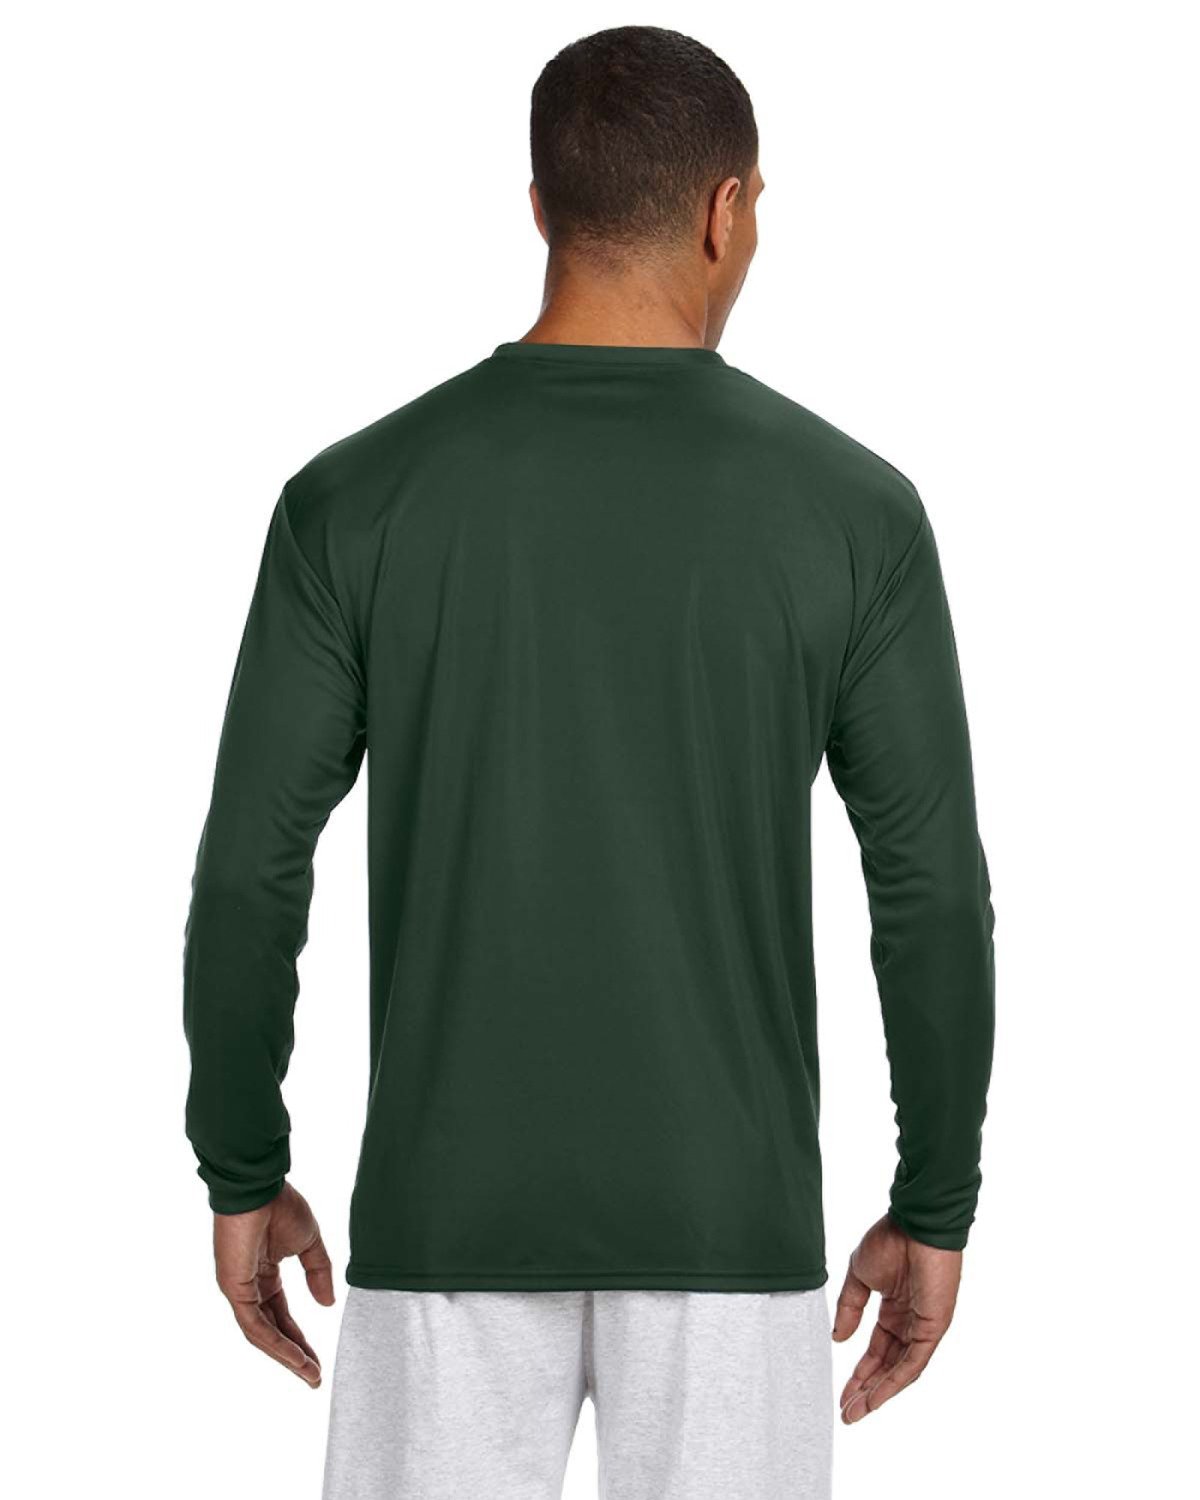 The Athlete's Long Sleeve